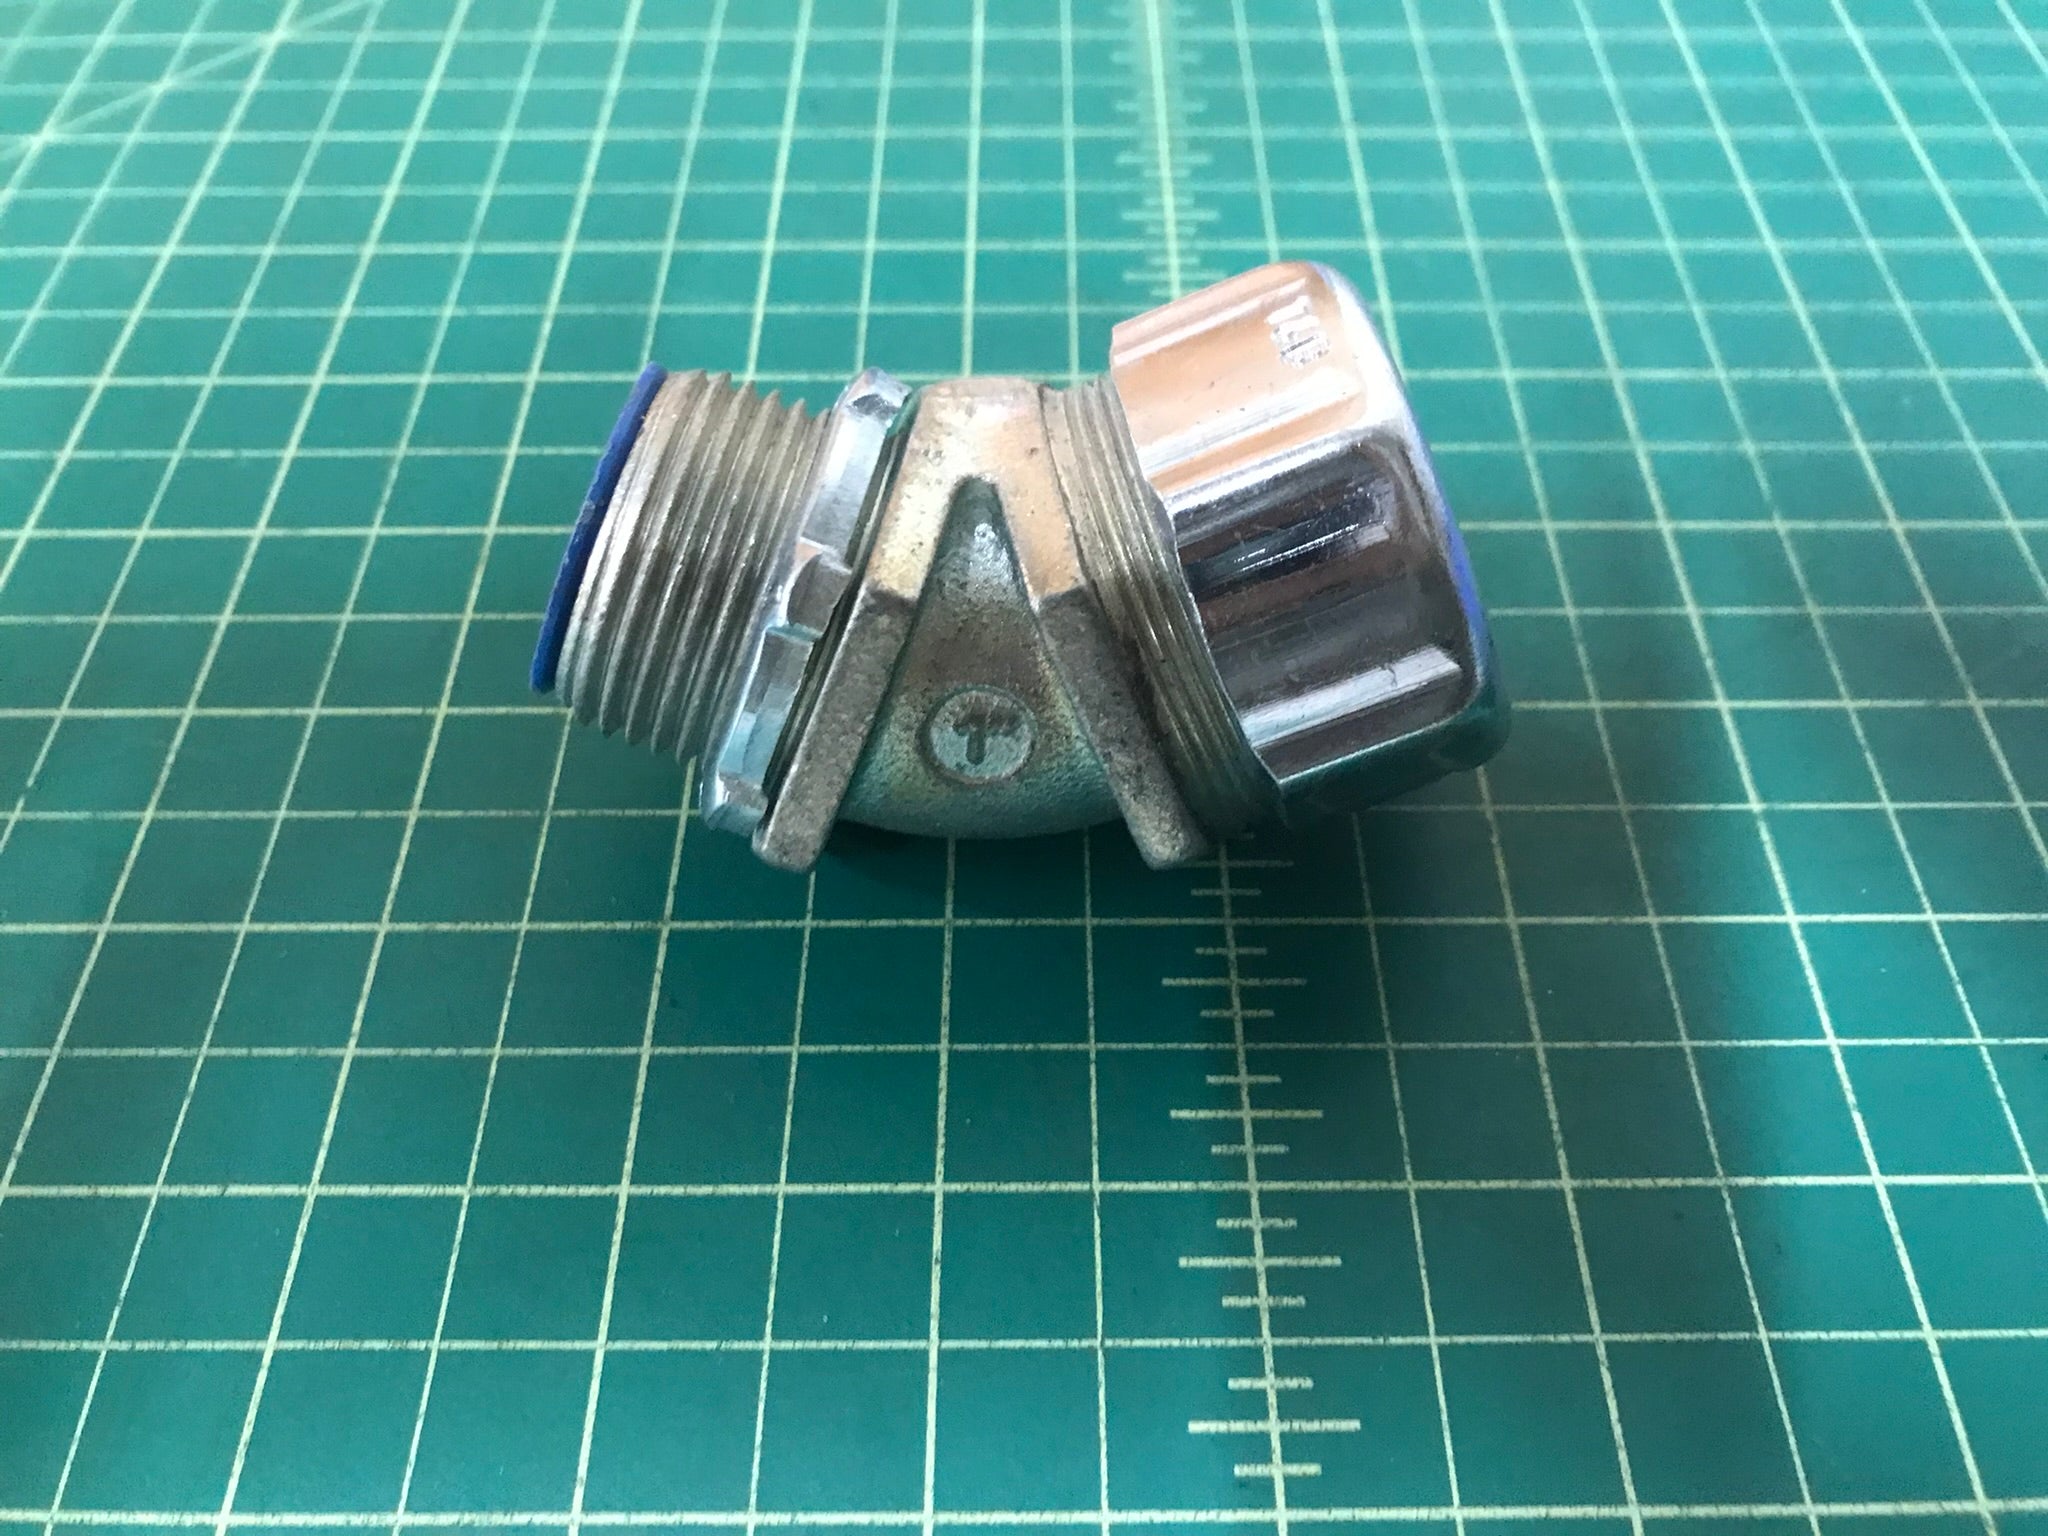 Flexible Conduit Connector - 45 degree 1" (Missing Washer)